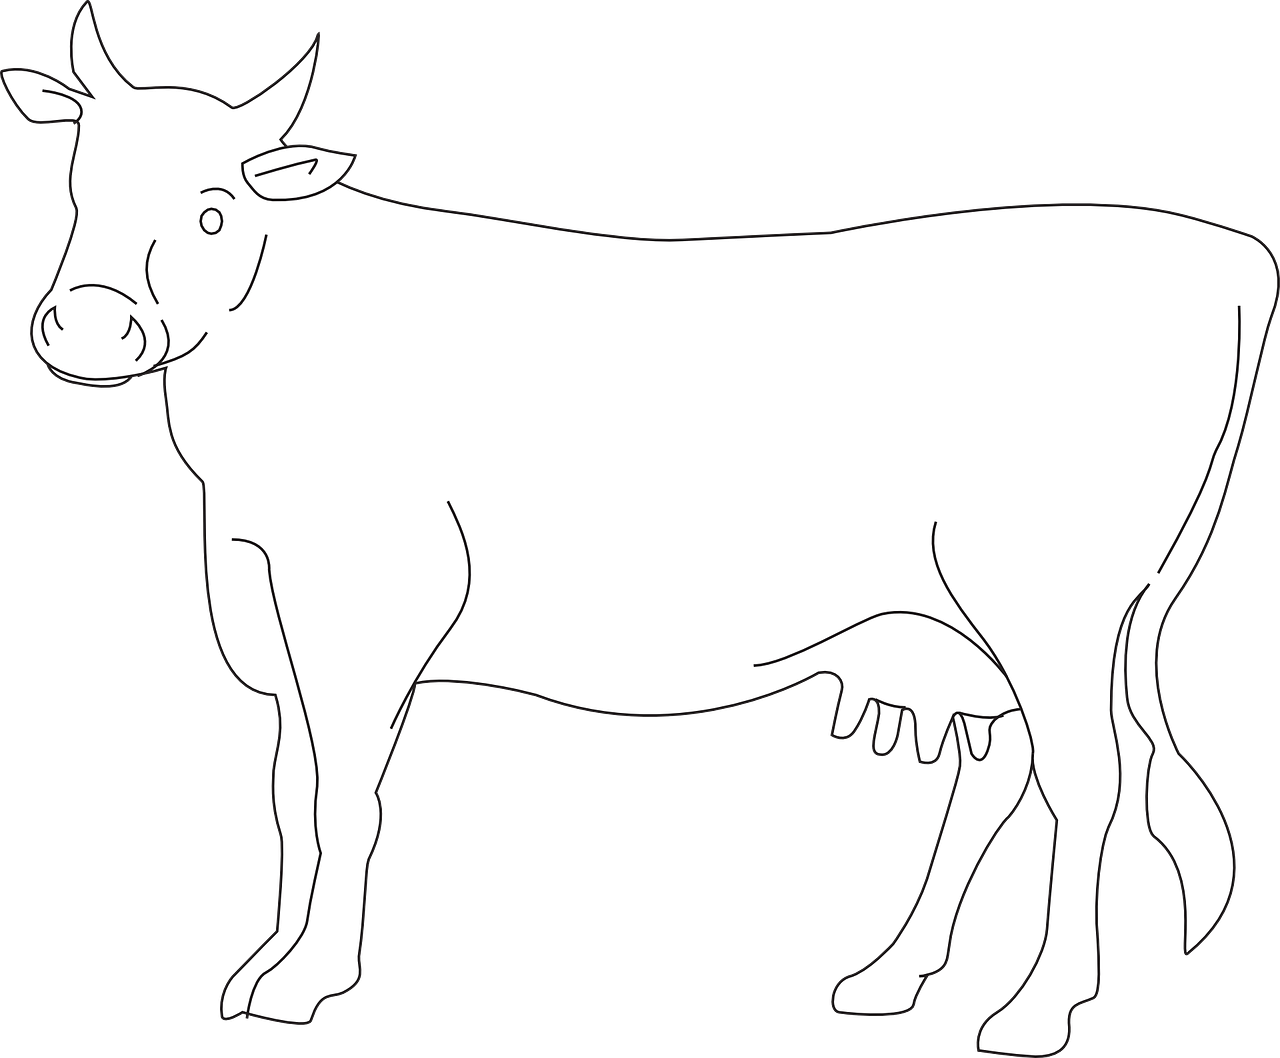 Outlined Dairy Cow Illustration PNG